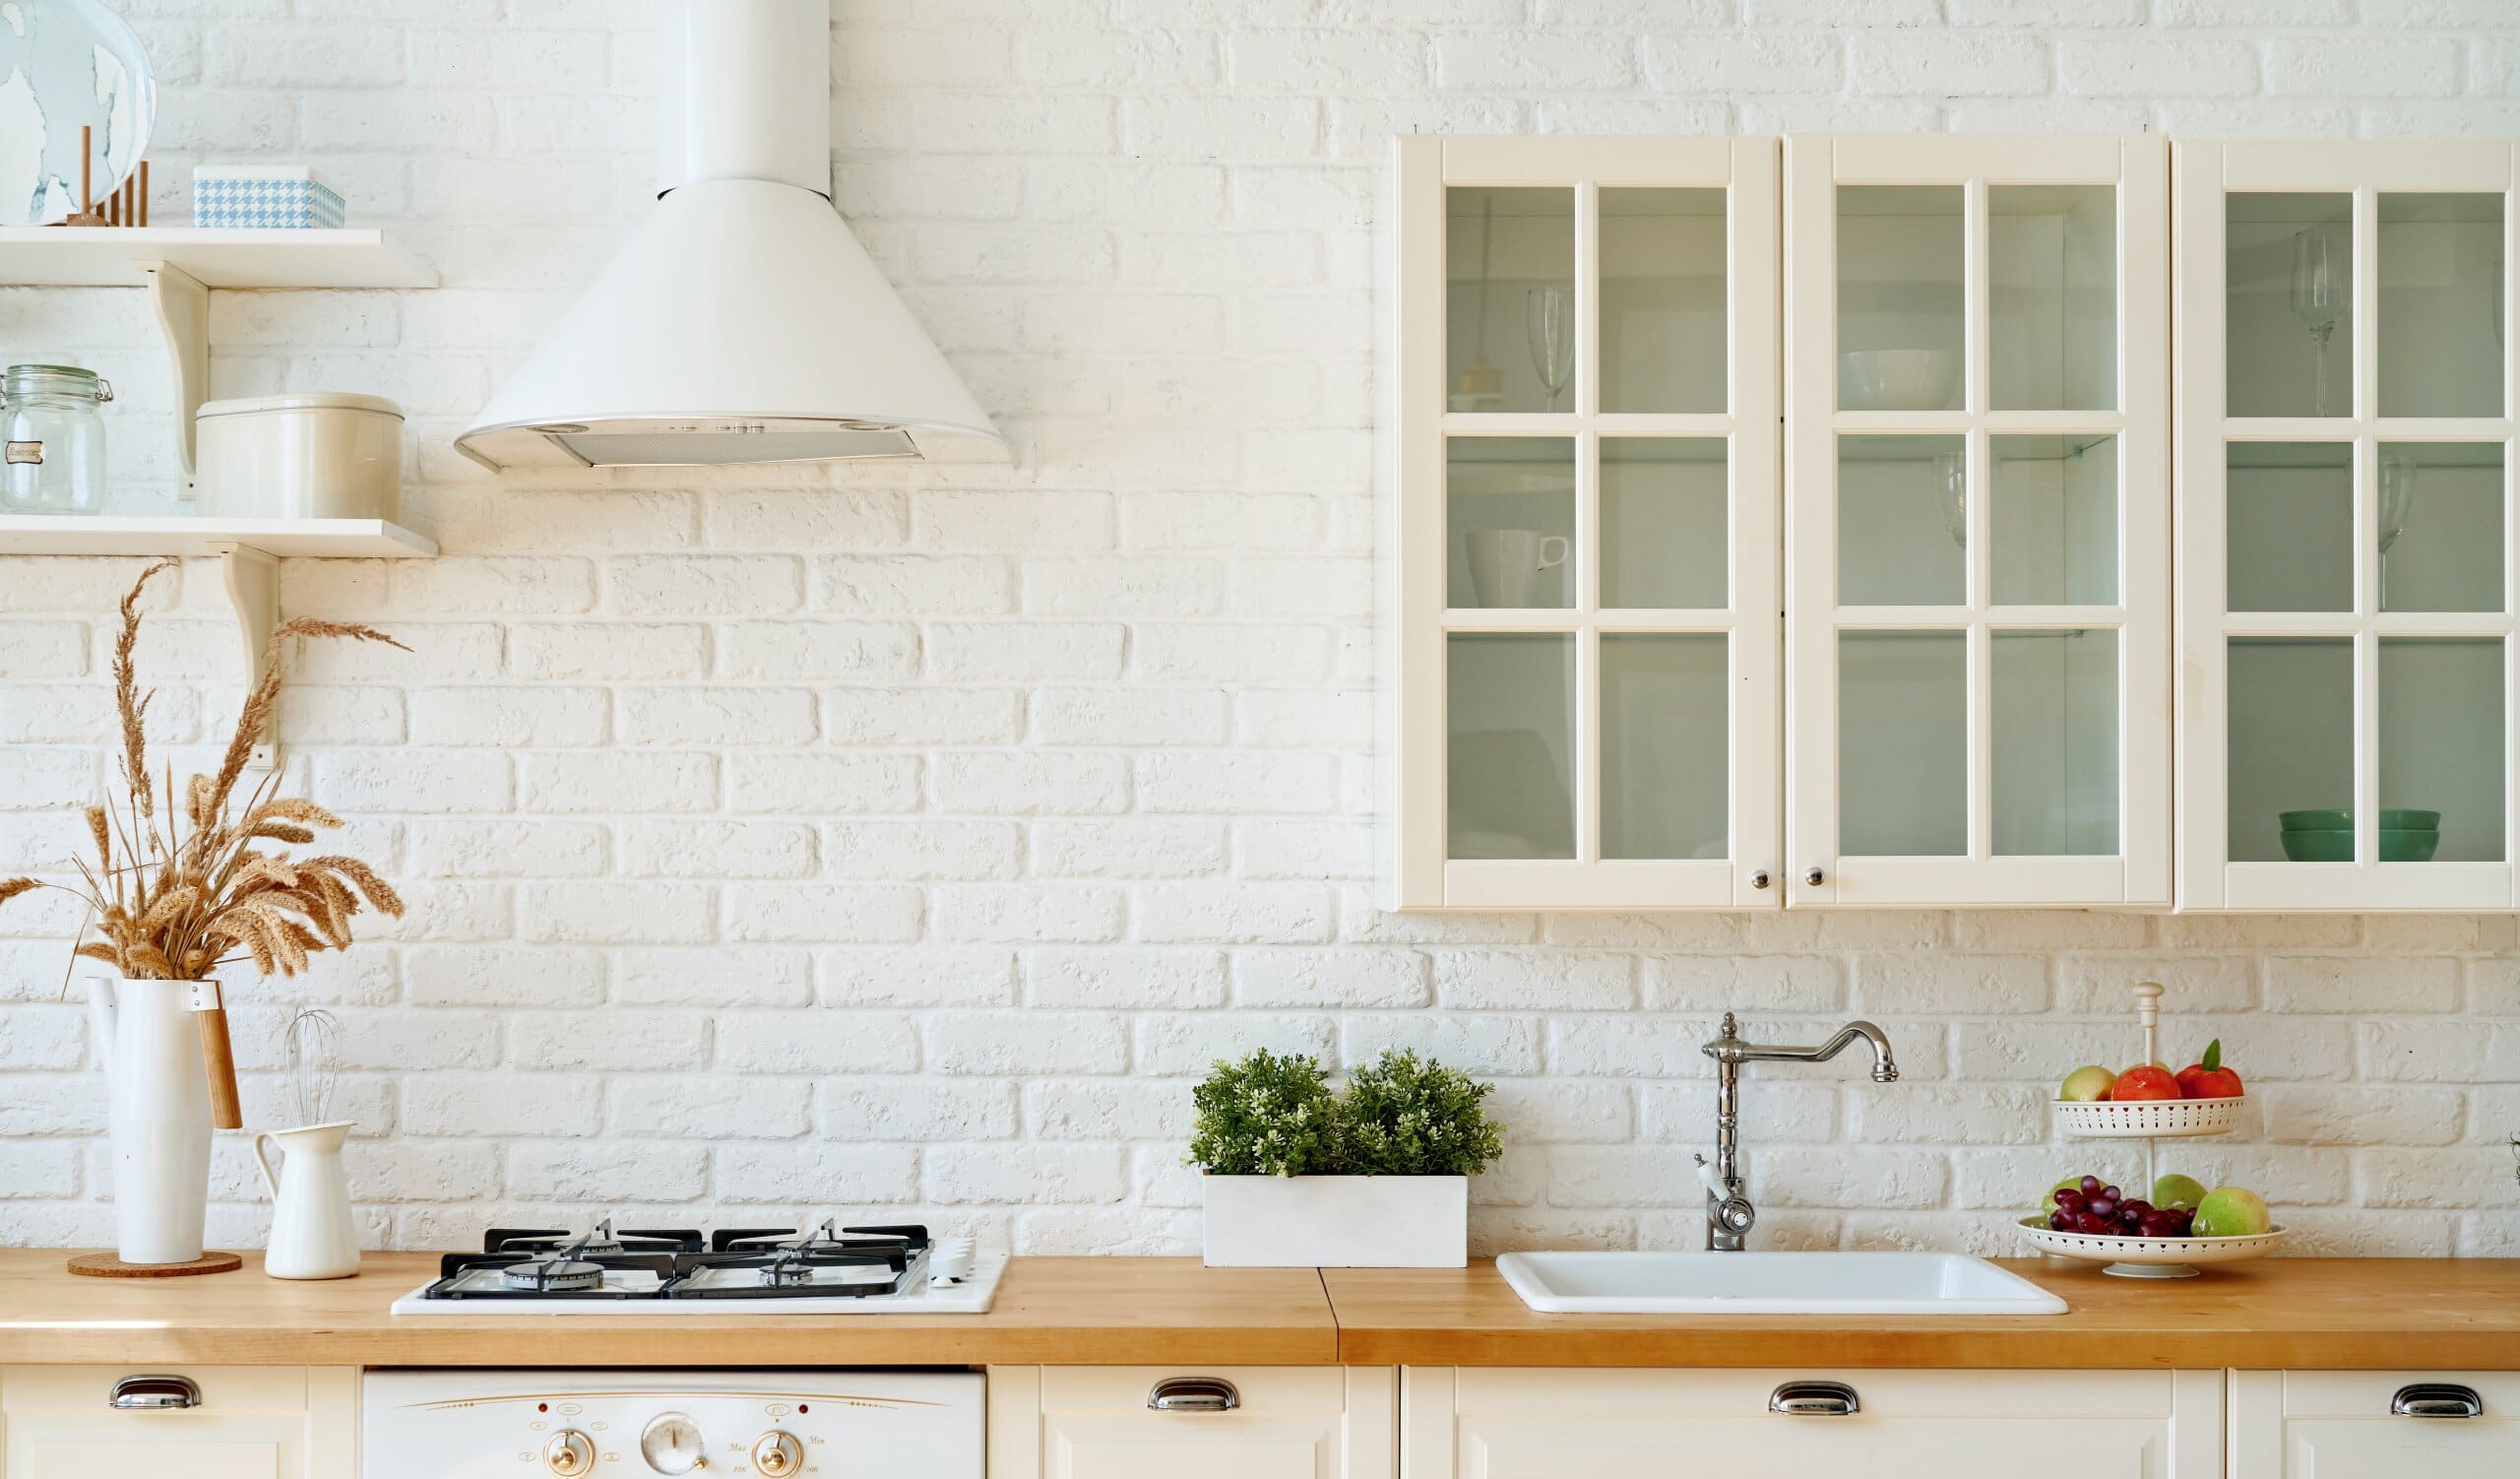 White kitchen interior with painted exposed brickwork.